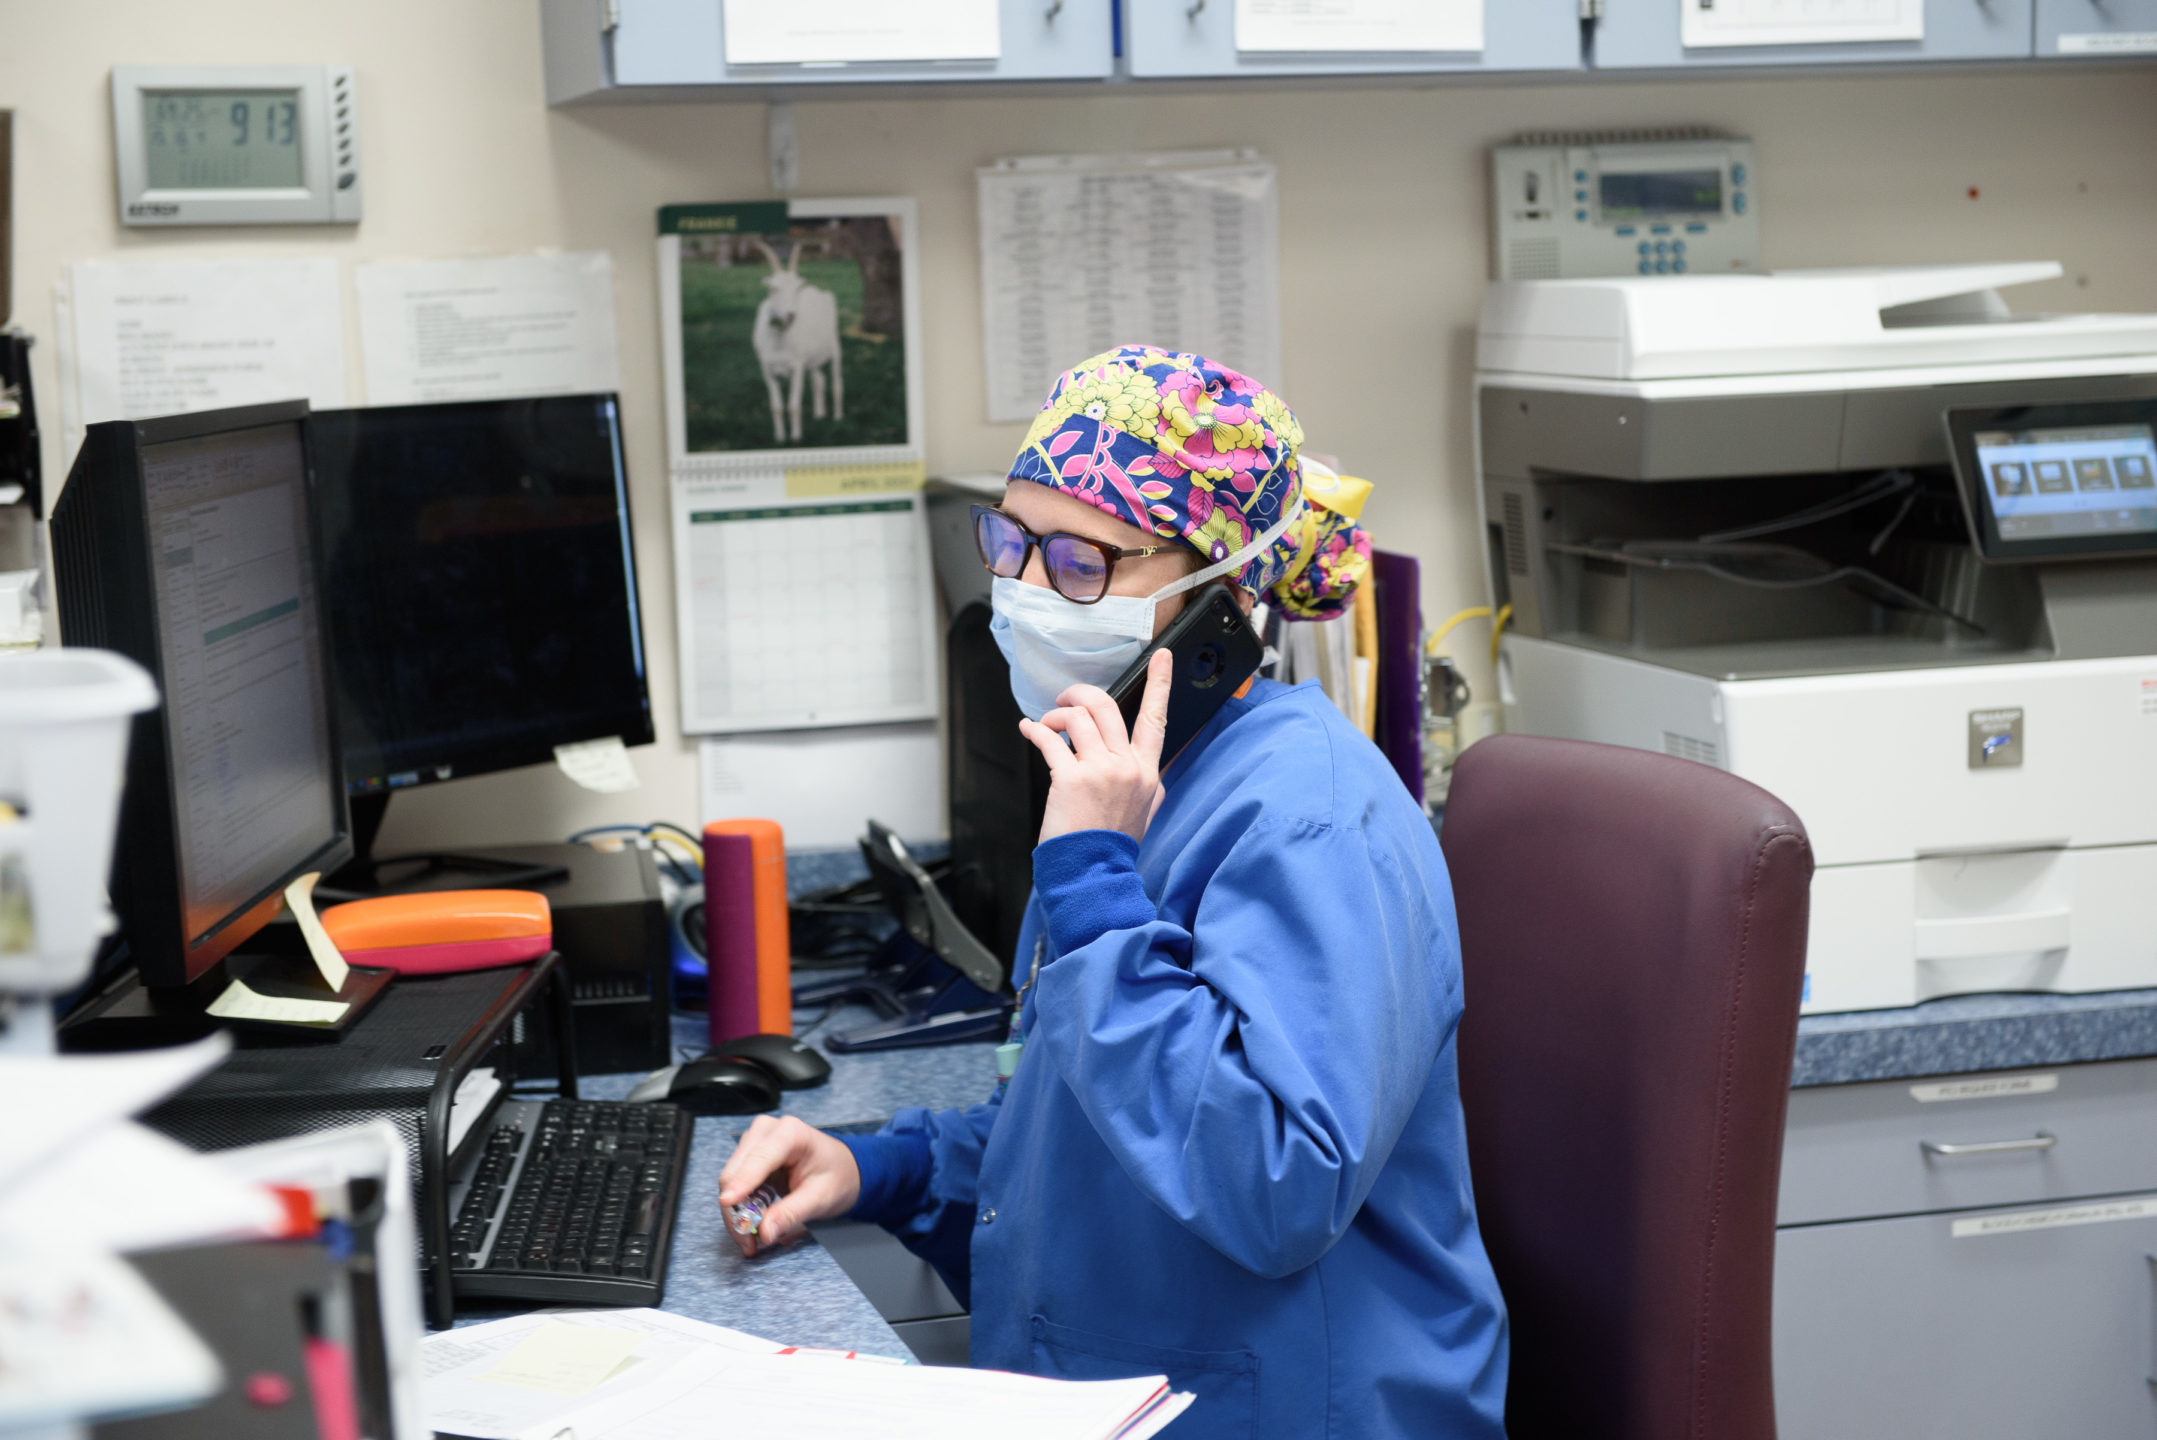  A staff member in scrubs and a mask talks on the phone while sitting in front of a computer. 